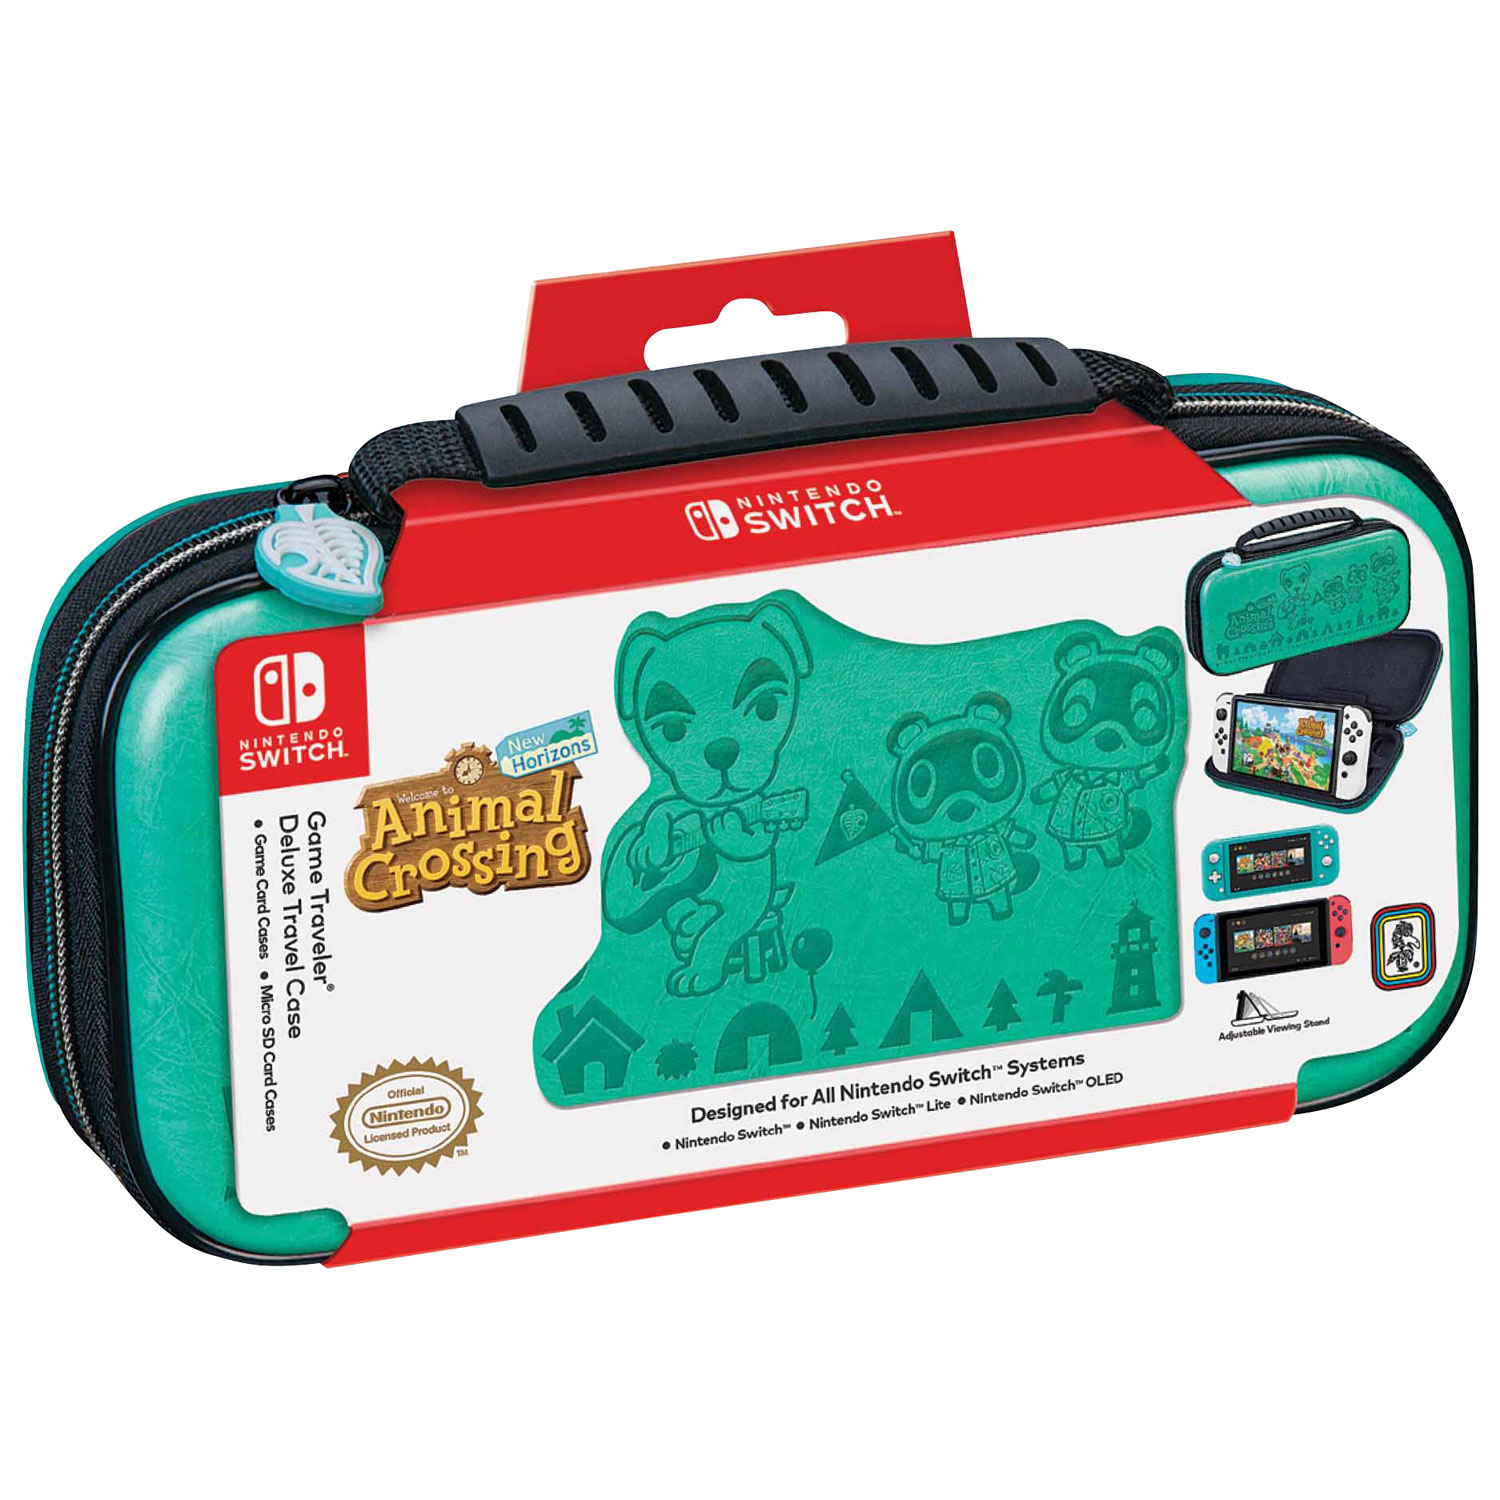 RDS Game Traveler Deluxe Travel Case for Nintendo Switch - Animal Crossing